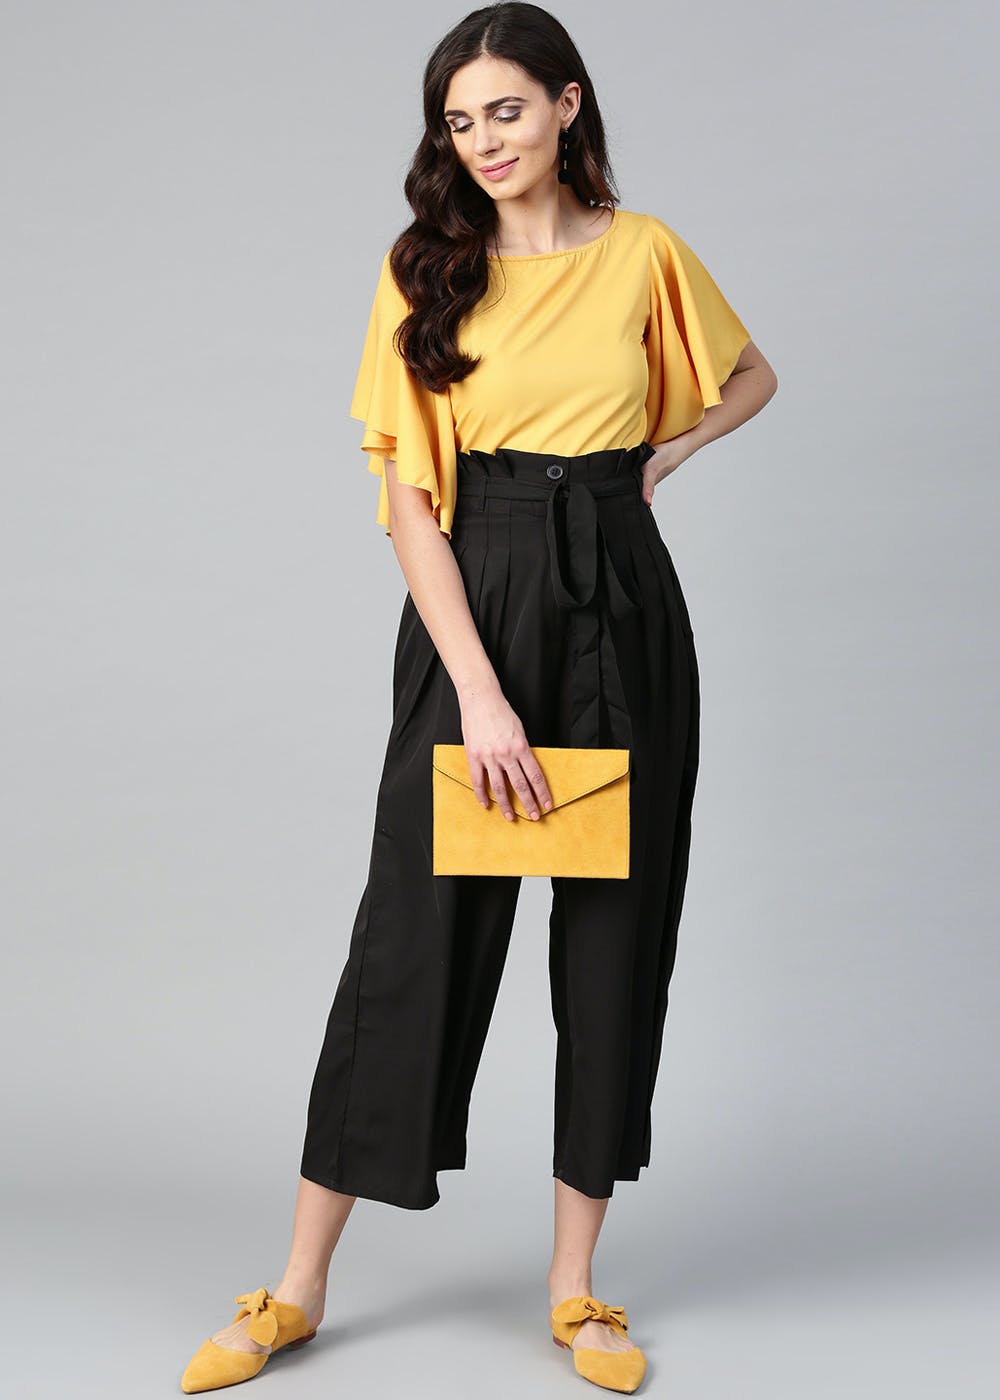 Power  Ruffle Top and Trousers  Shaleena Nowbuth